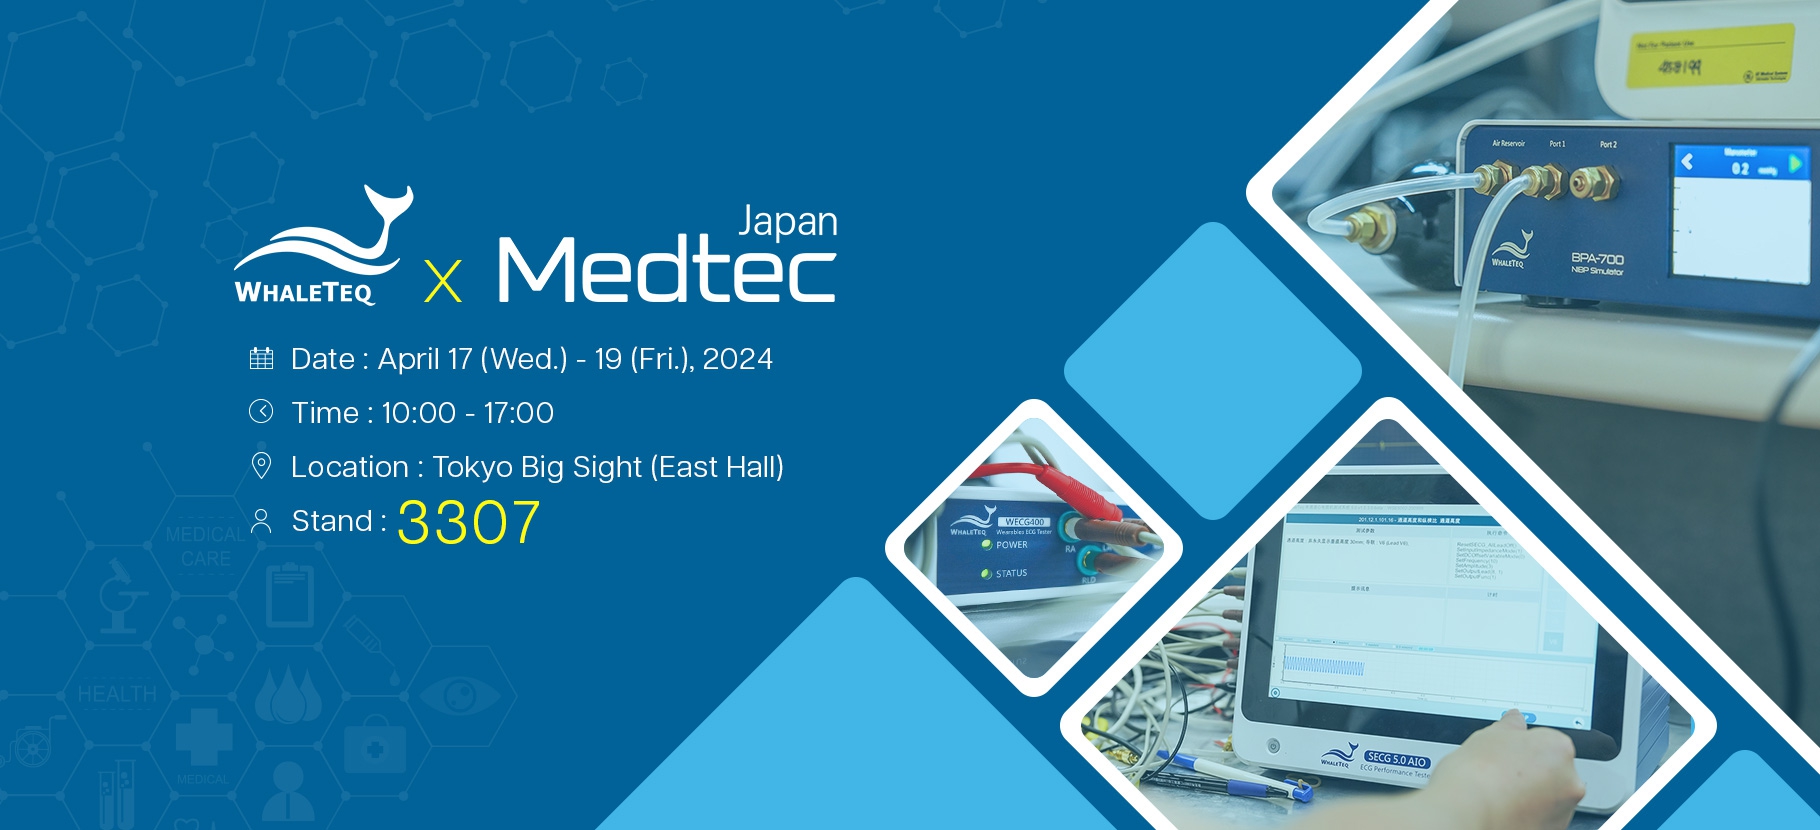 WhaleTeq's First-Time Presence at Asia's Largest Exhibition for the Design and Manufacture of Medical Device